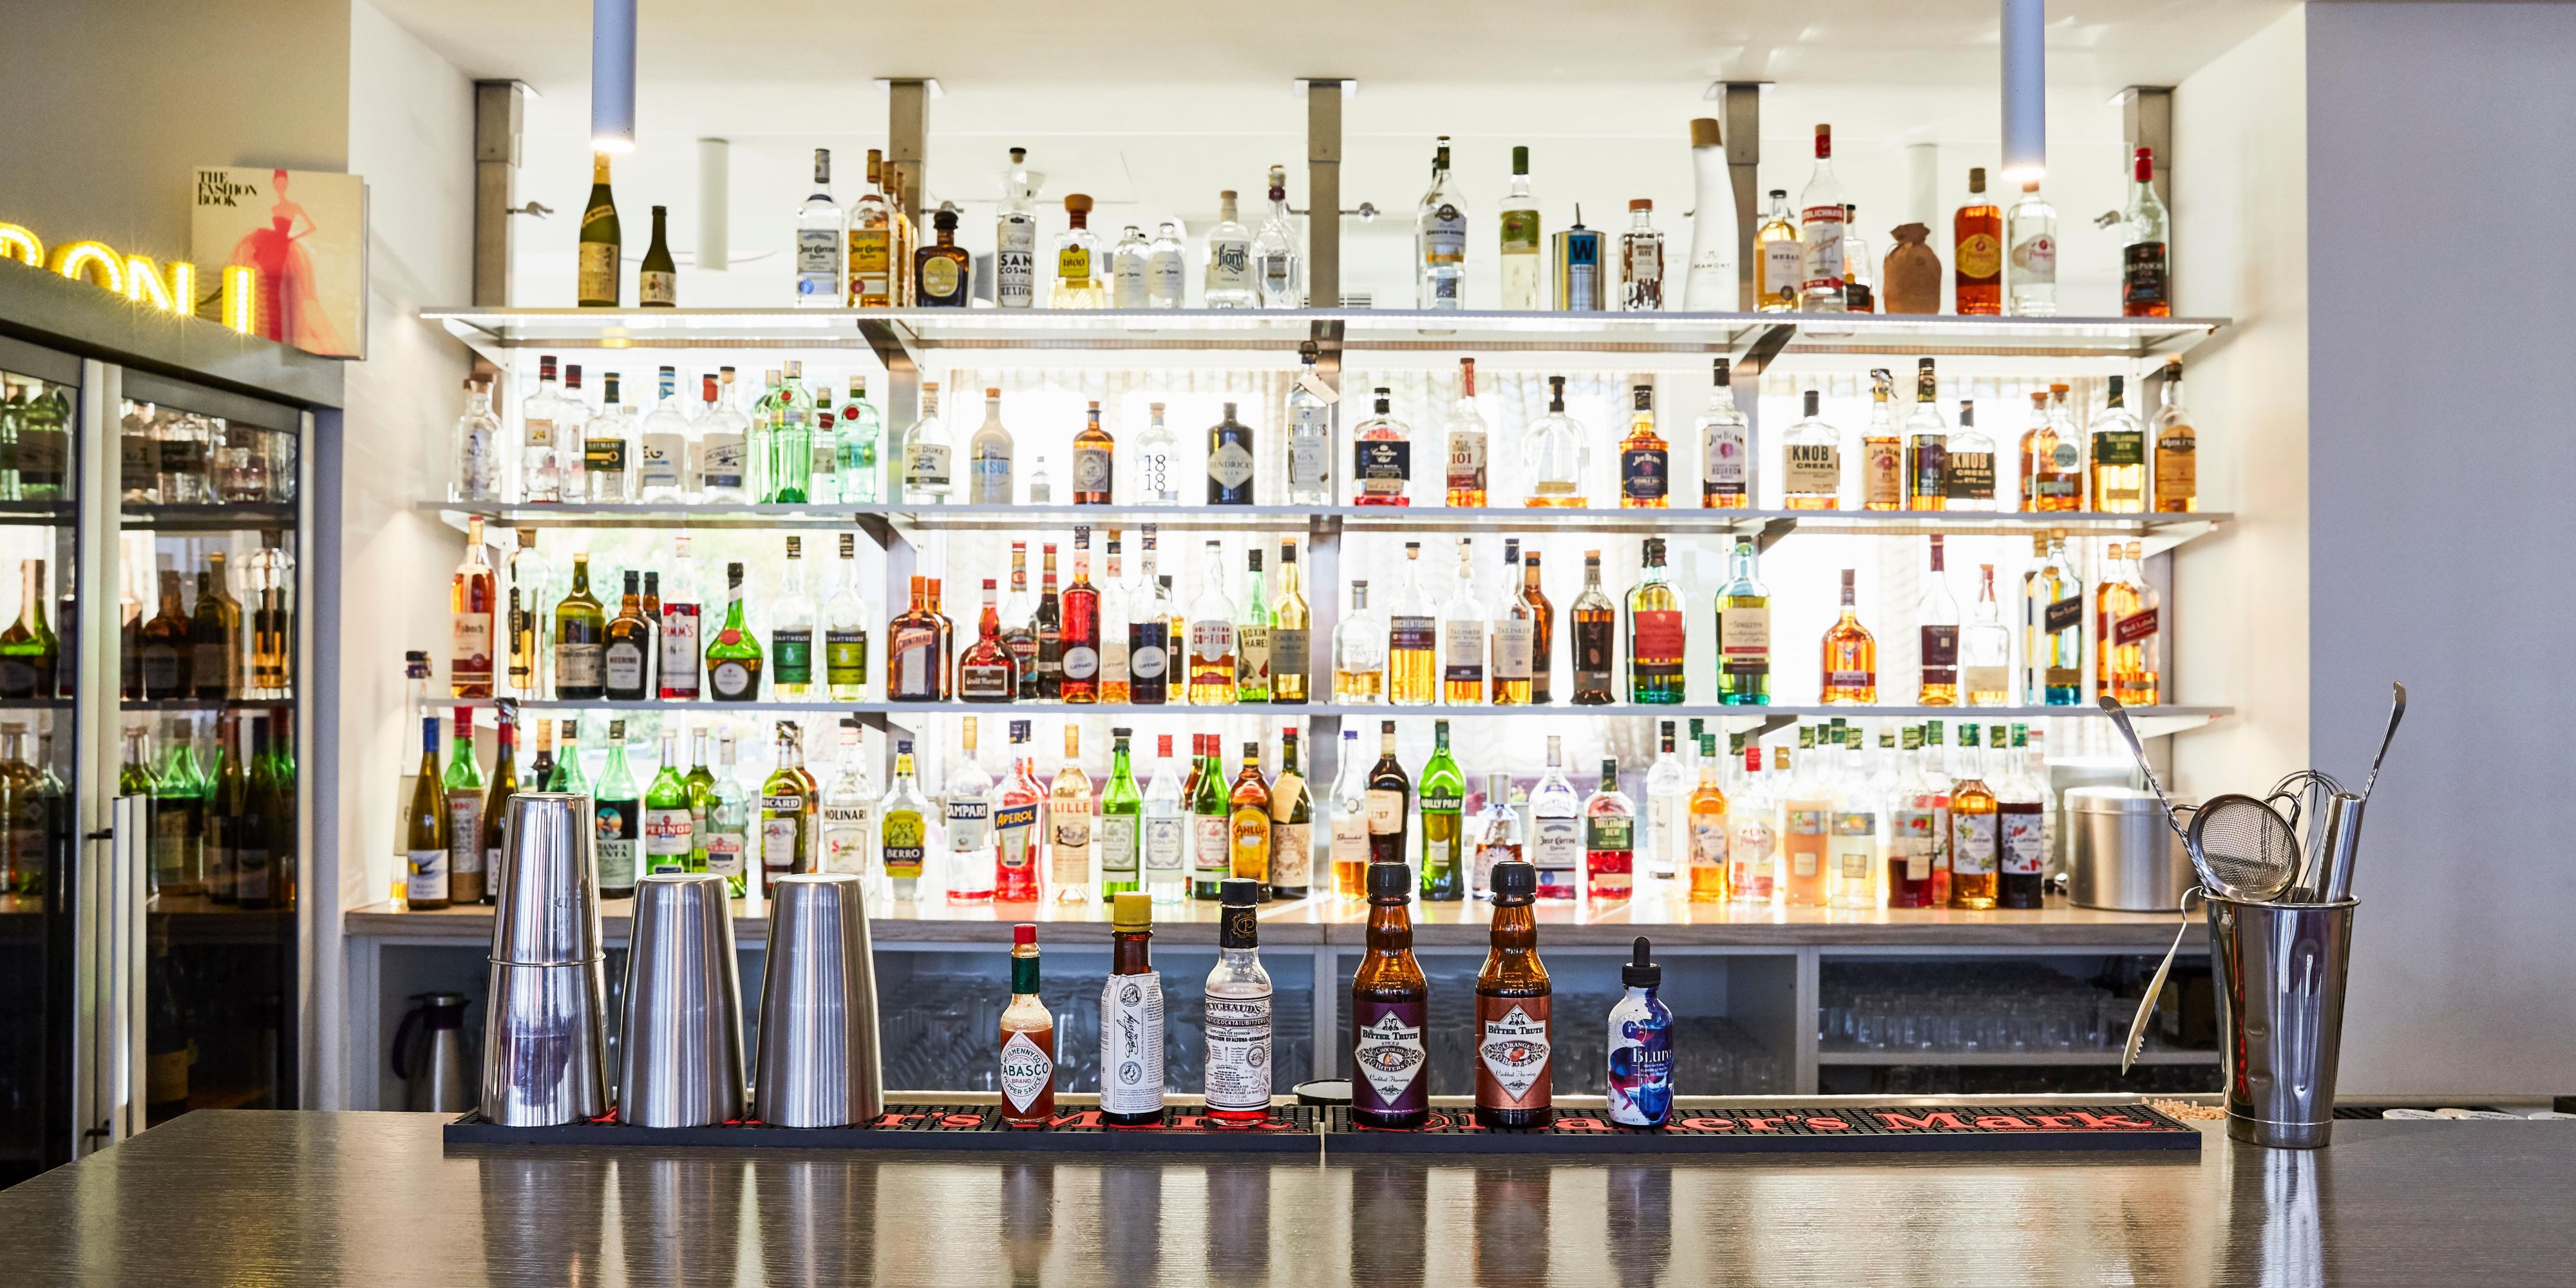 A large selection of premium spirits, wines and beers at the bar.